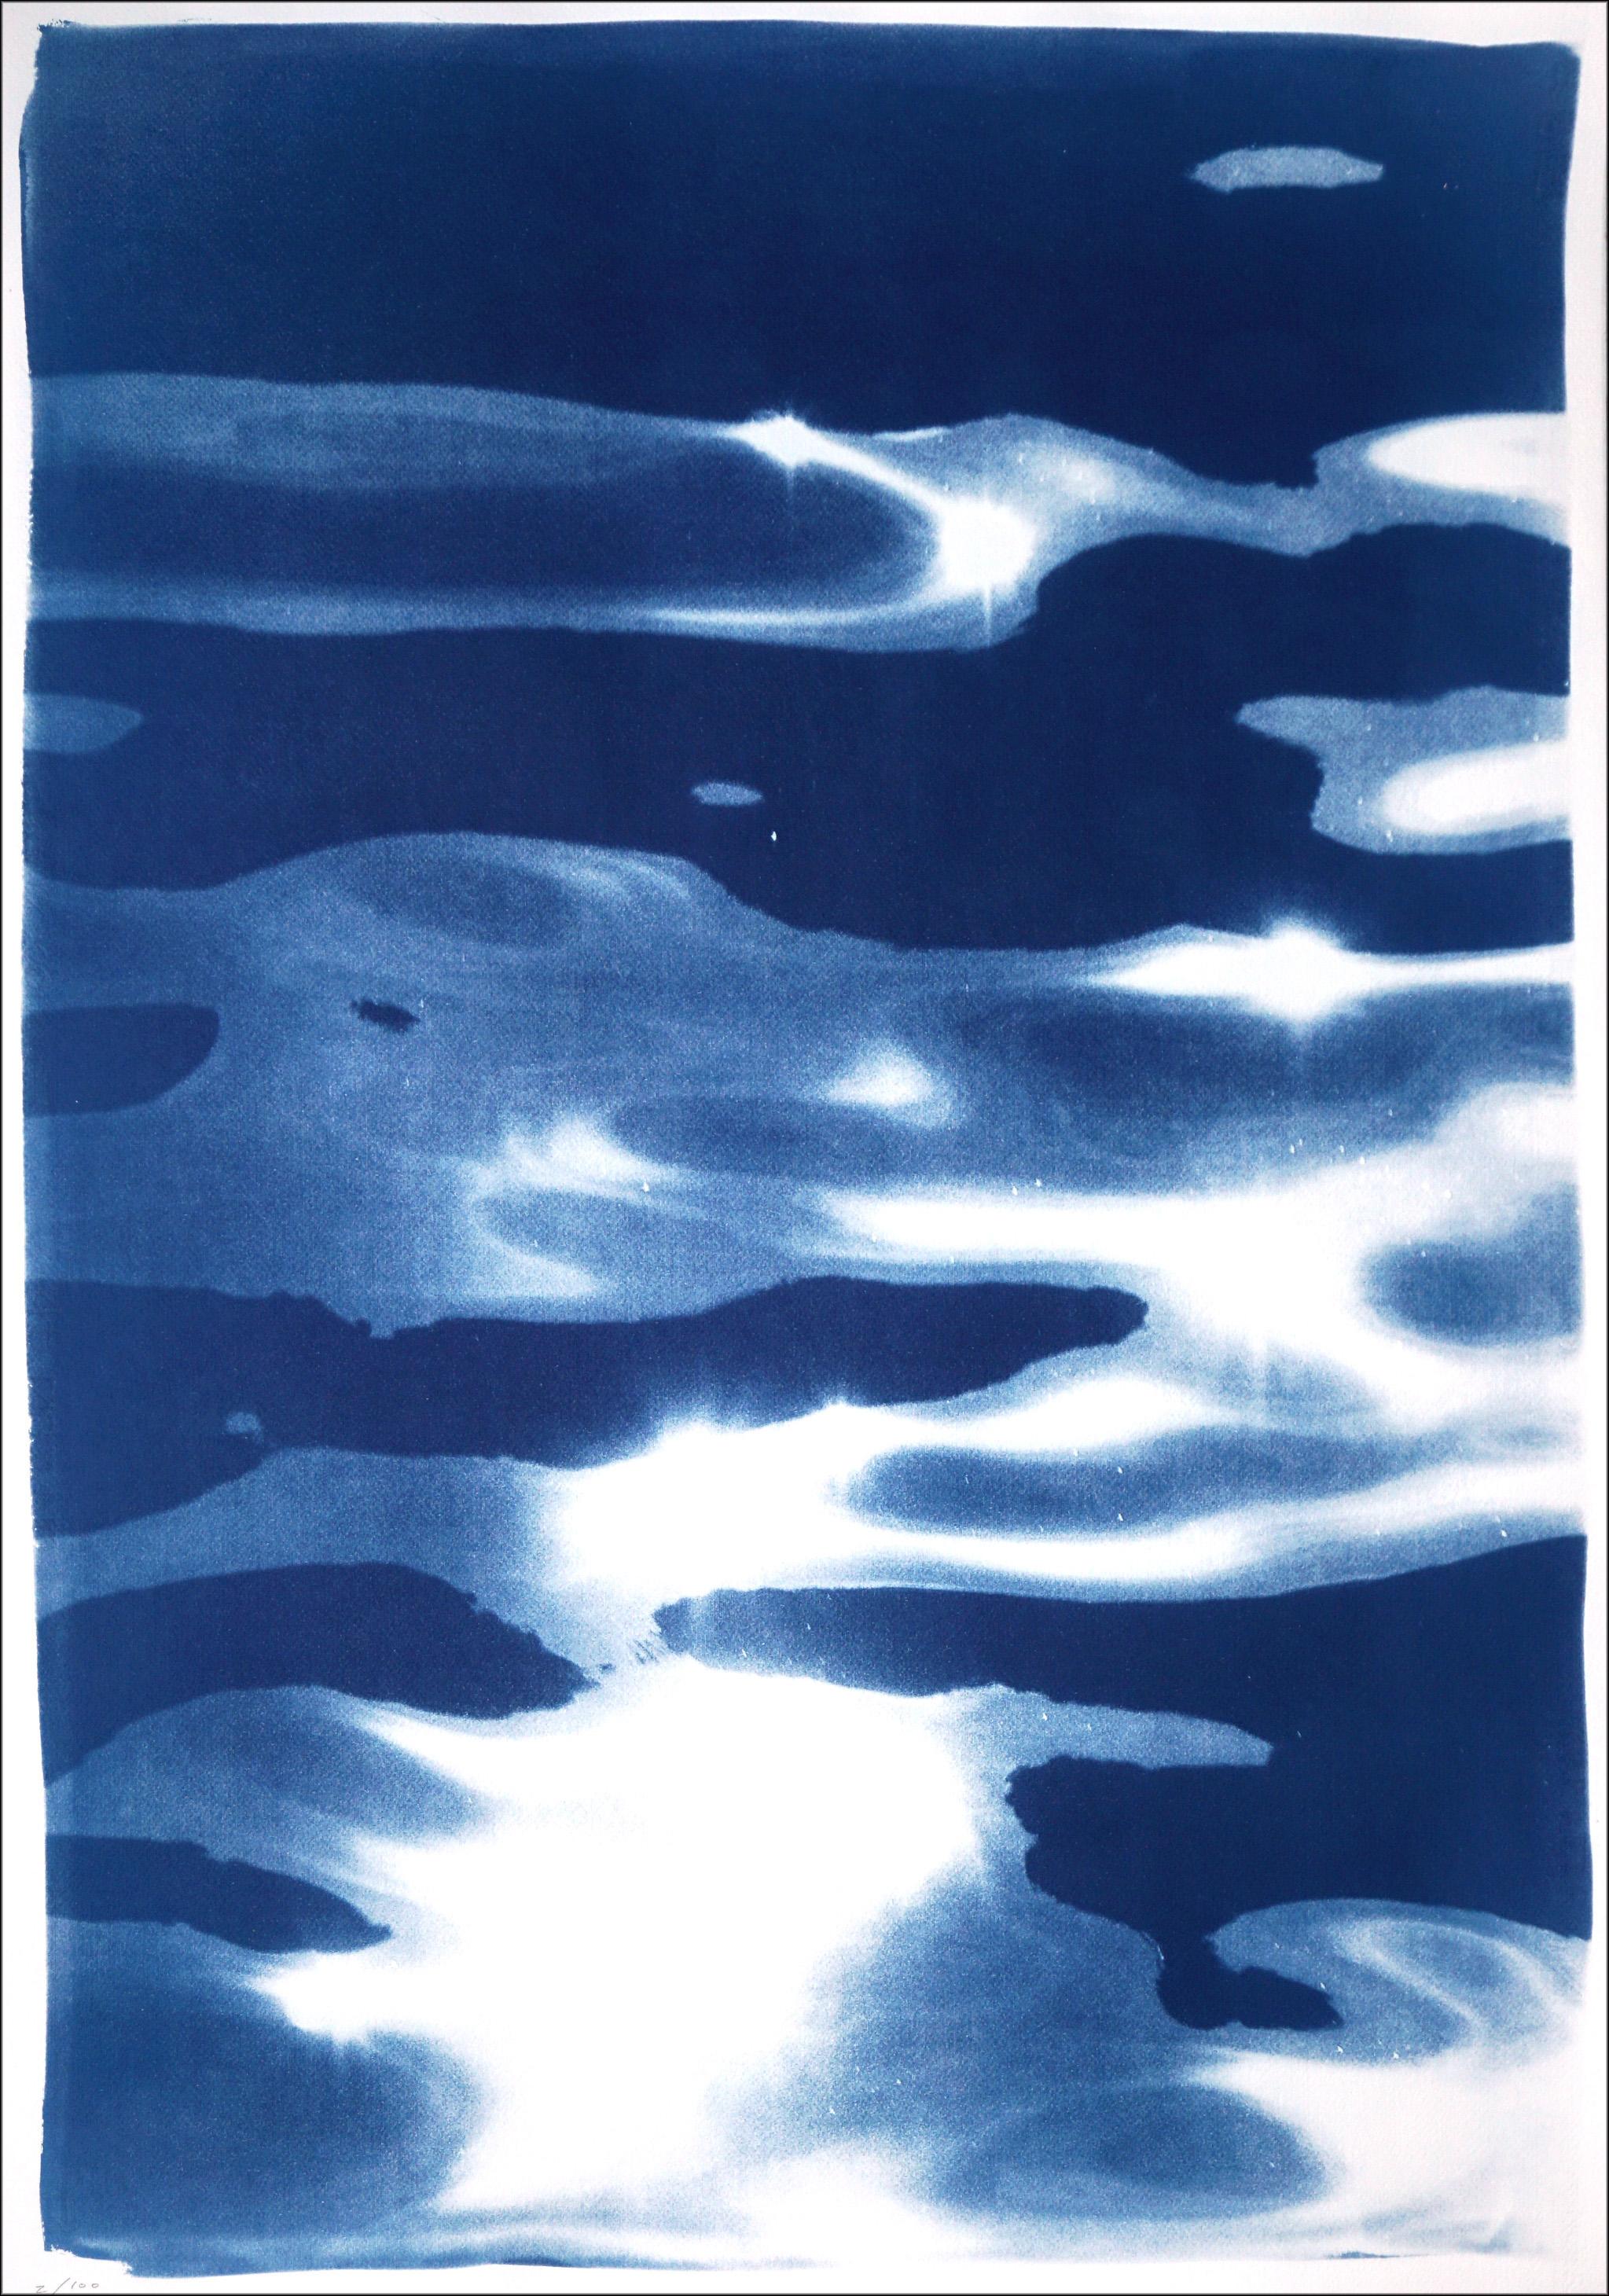 Venice Seascape Triptych, Blue Lido Island Reflections, Contemporary Cyanotype - Abstract Print by Kind of Cyan